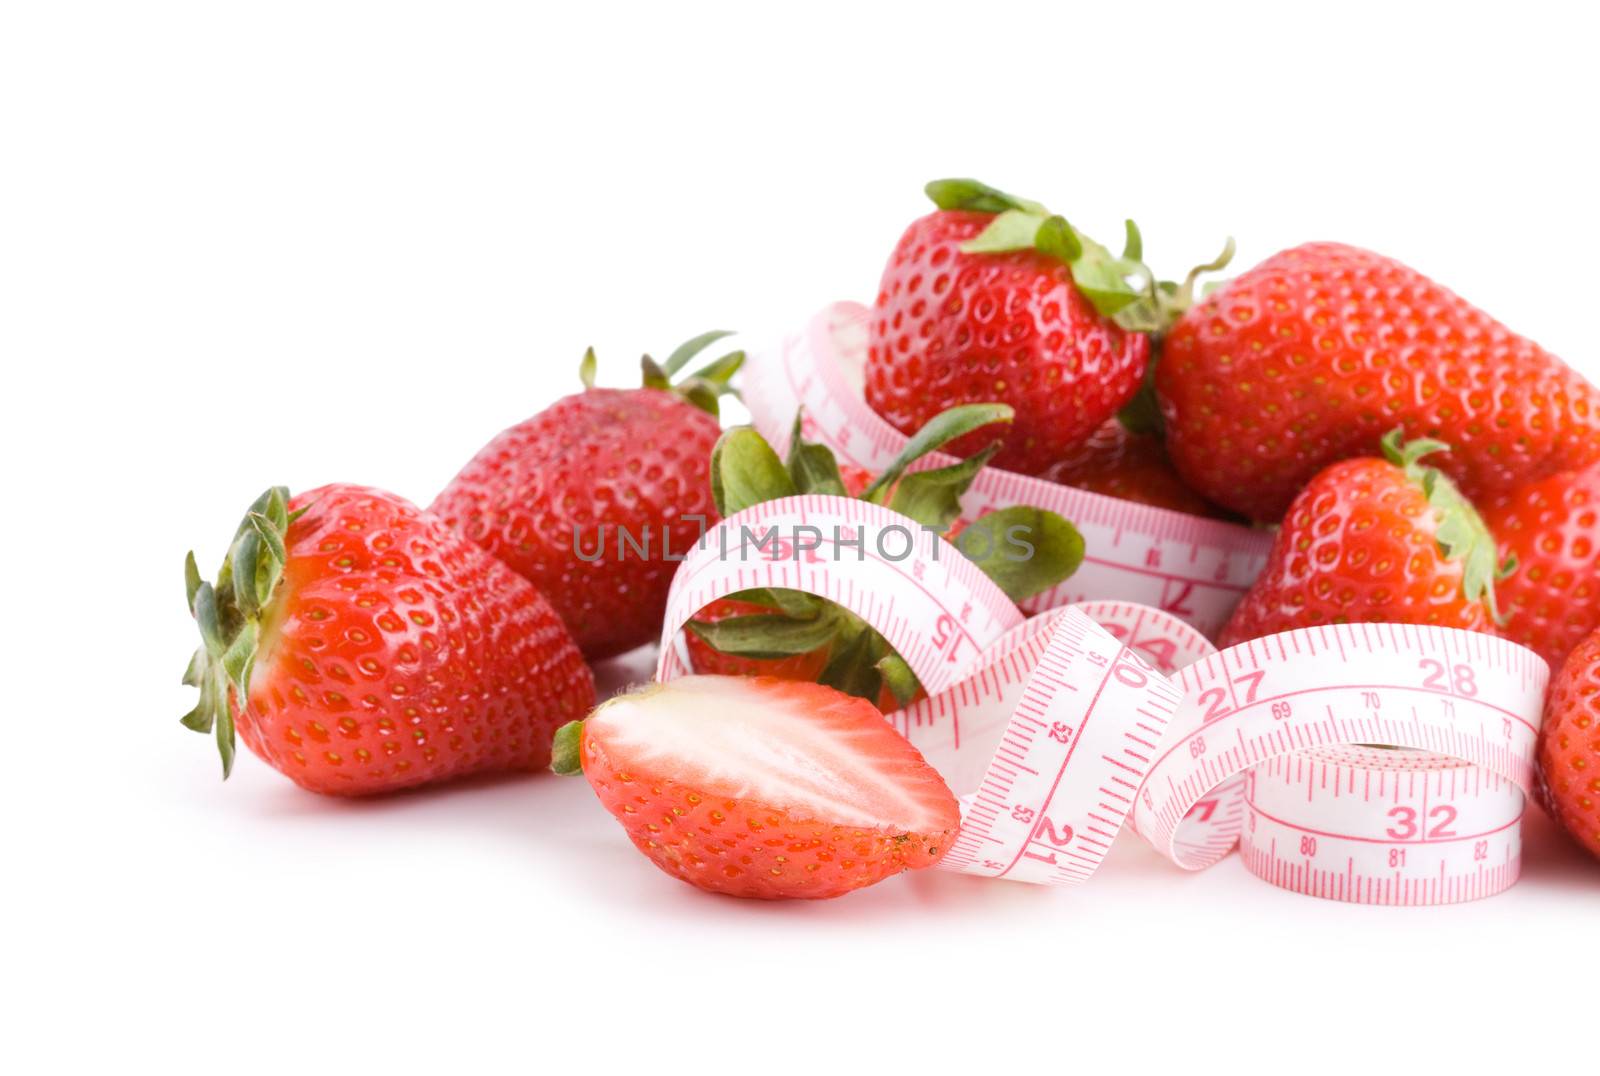 Fresh strawberries with measure tape isolated on white